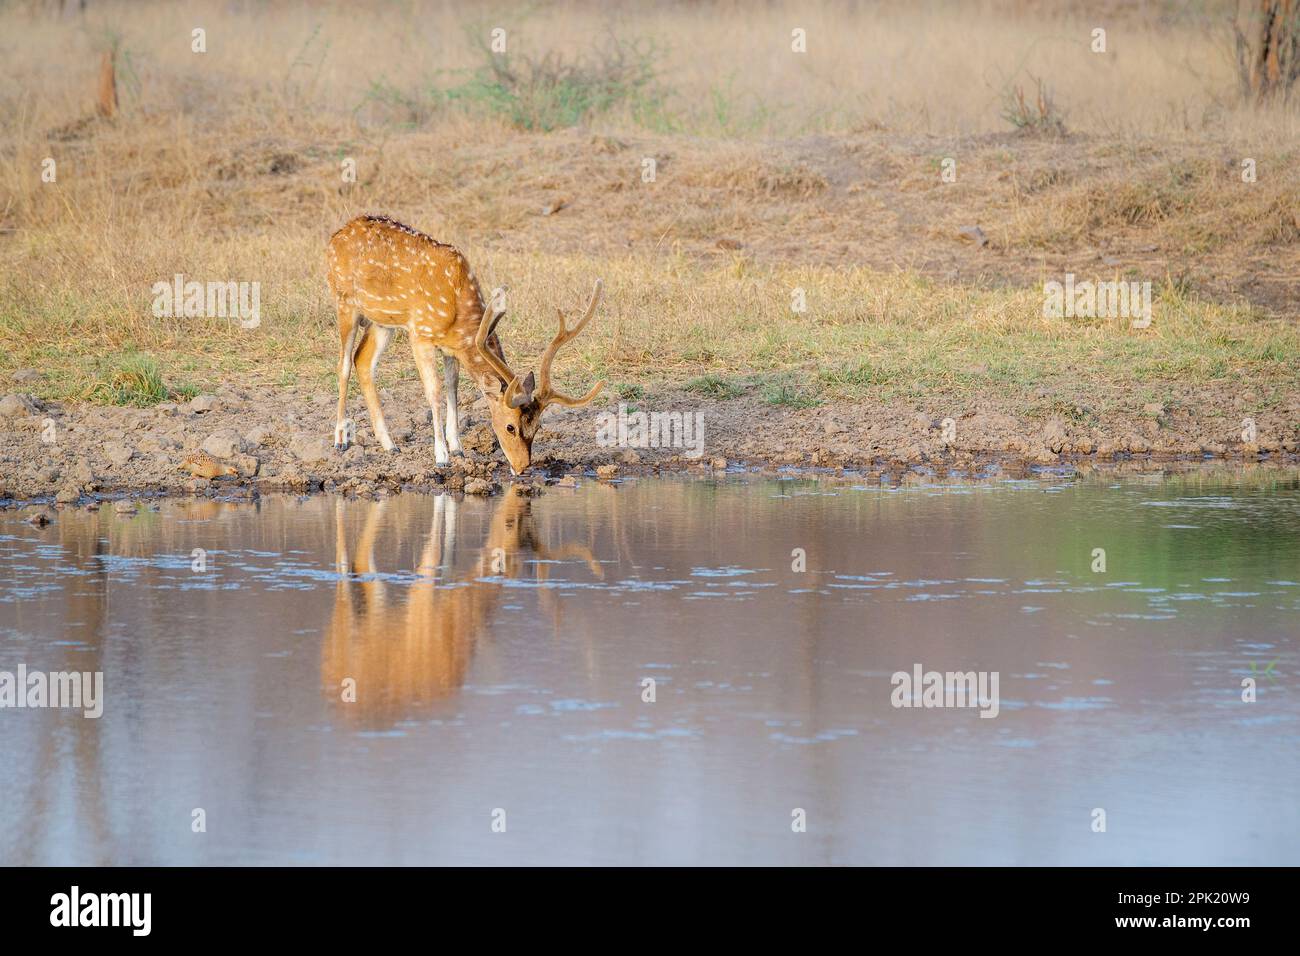 Chital or spotted deer drinks water at a lake. Male animal with large antlers and white spots on its fur. Ranthambore National Park, Rajasthan, India Stock Photo